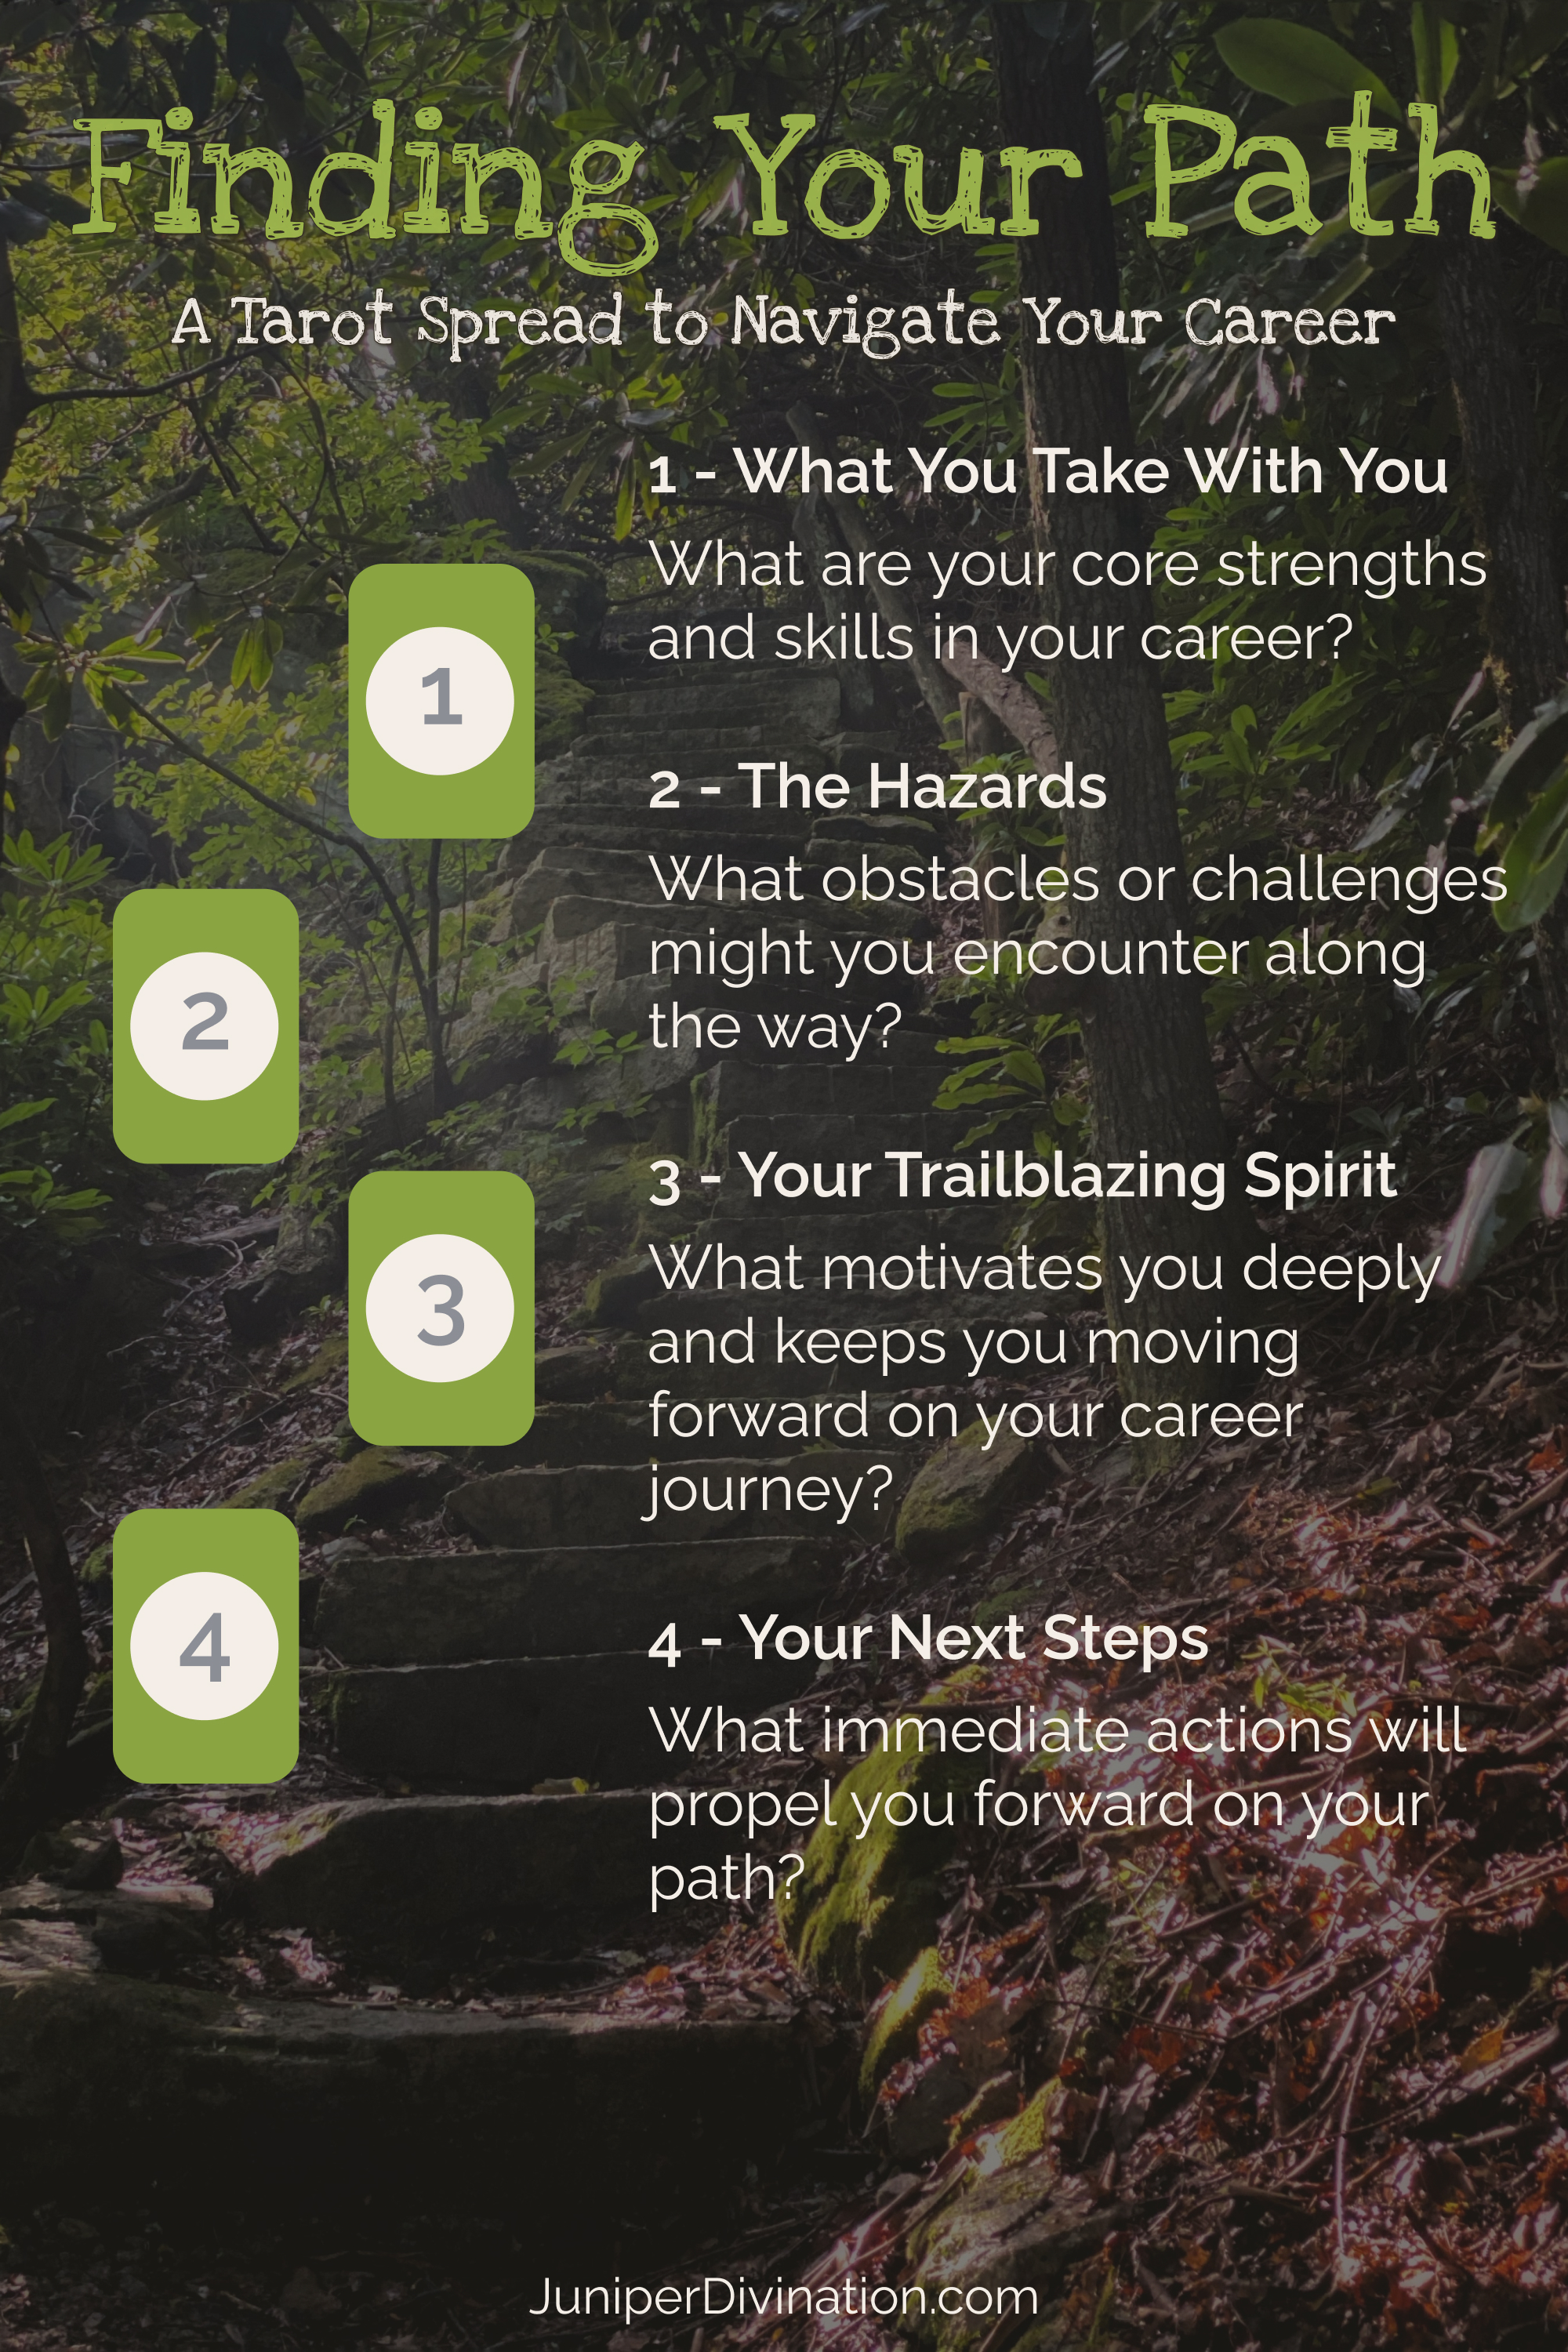 Finding Your Path - A Tarot Spread to Navigate Your Career